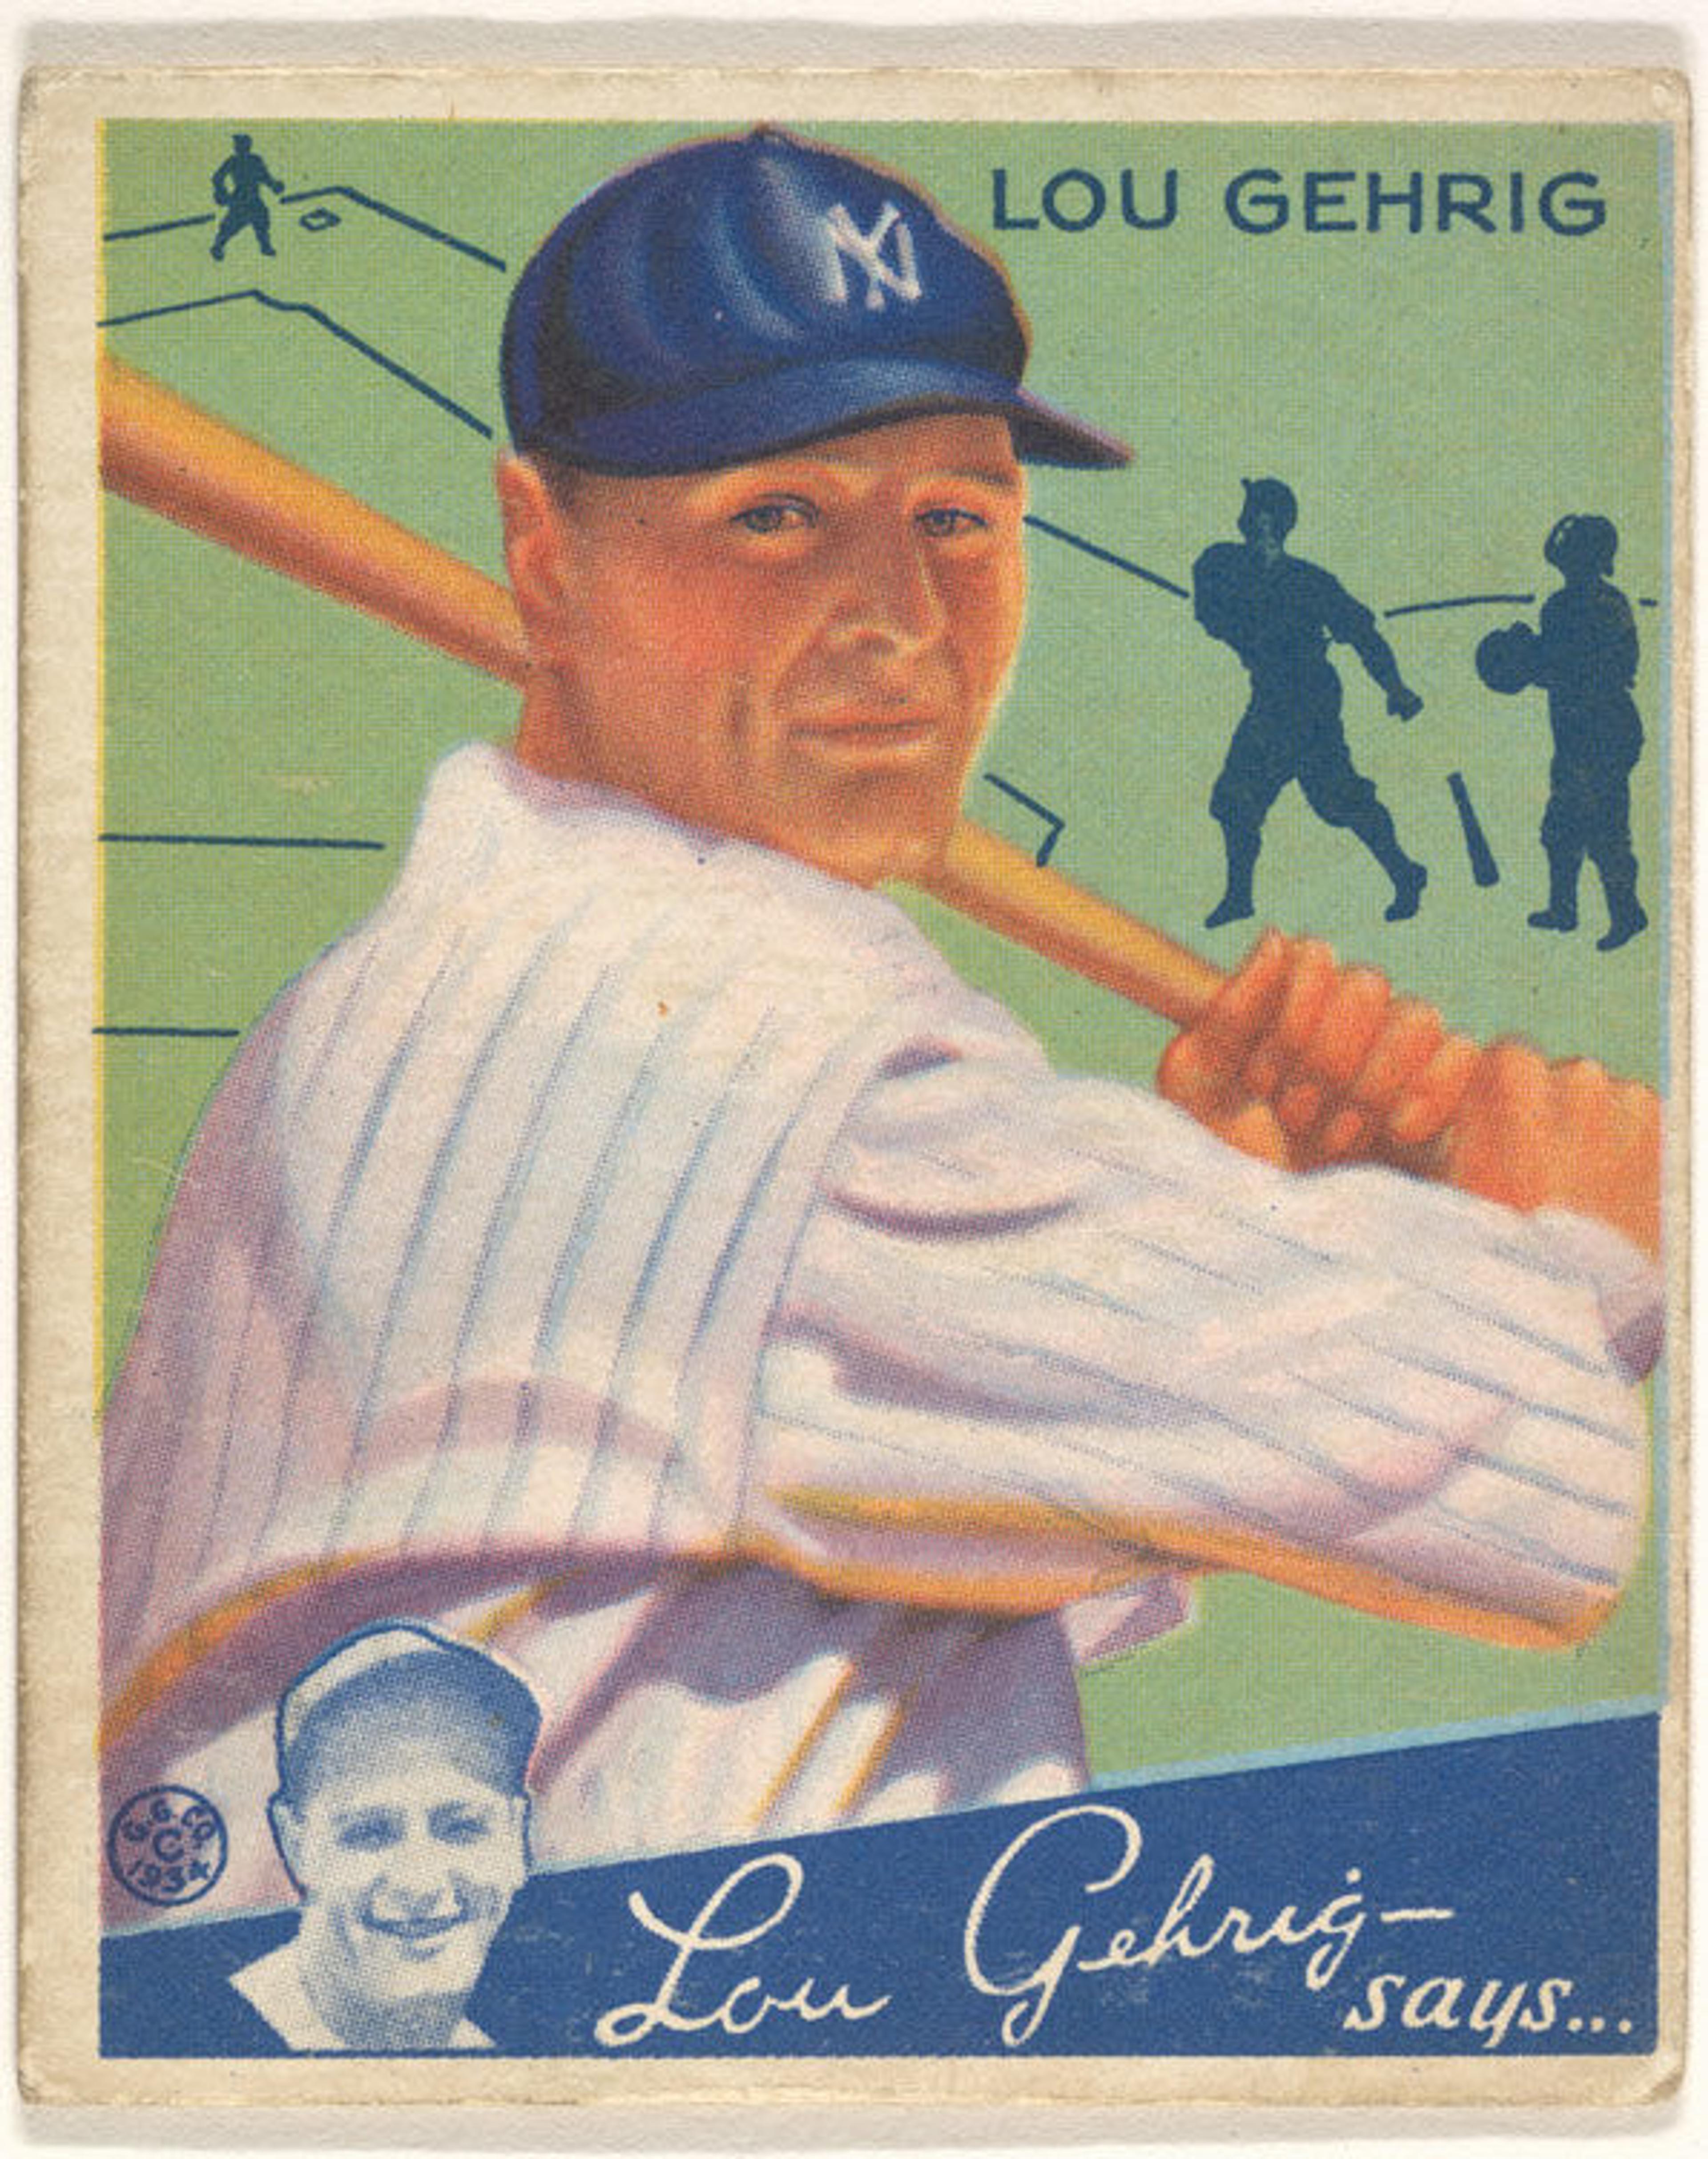 Goudey Gum Company (American, Boston, Massachusetts) | Lou Gehrig, New York Yankees, from the Big League Chewing Gum series (R320) for the Goudey Gum Company | Burdick 325, R320.61